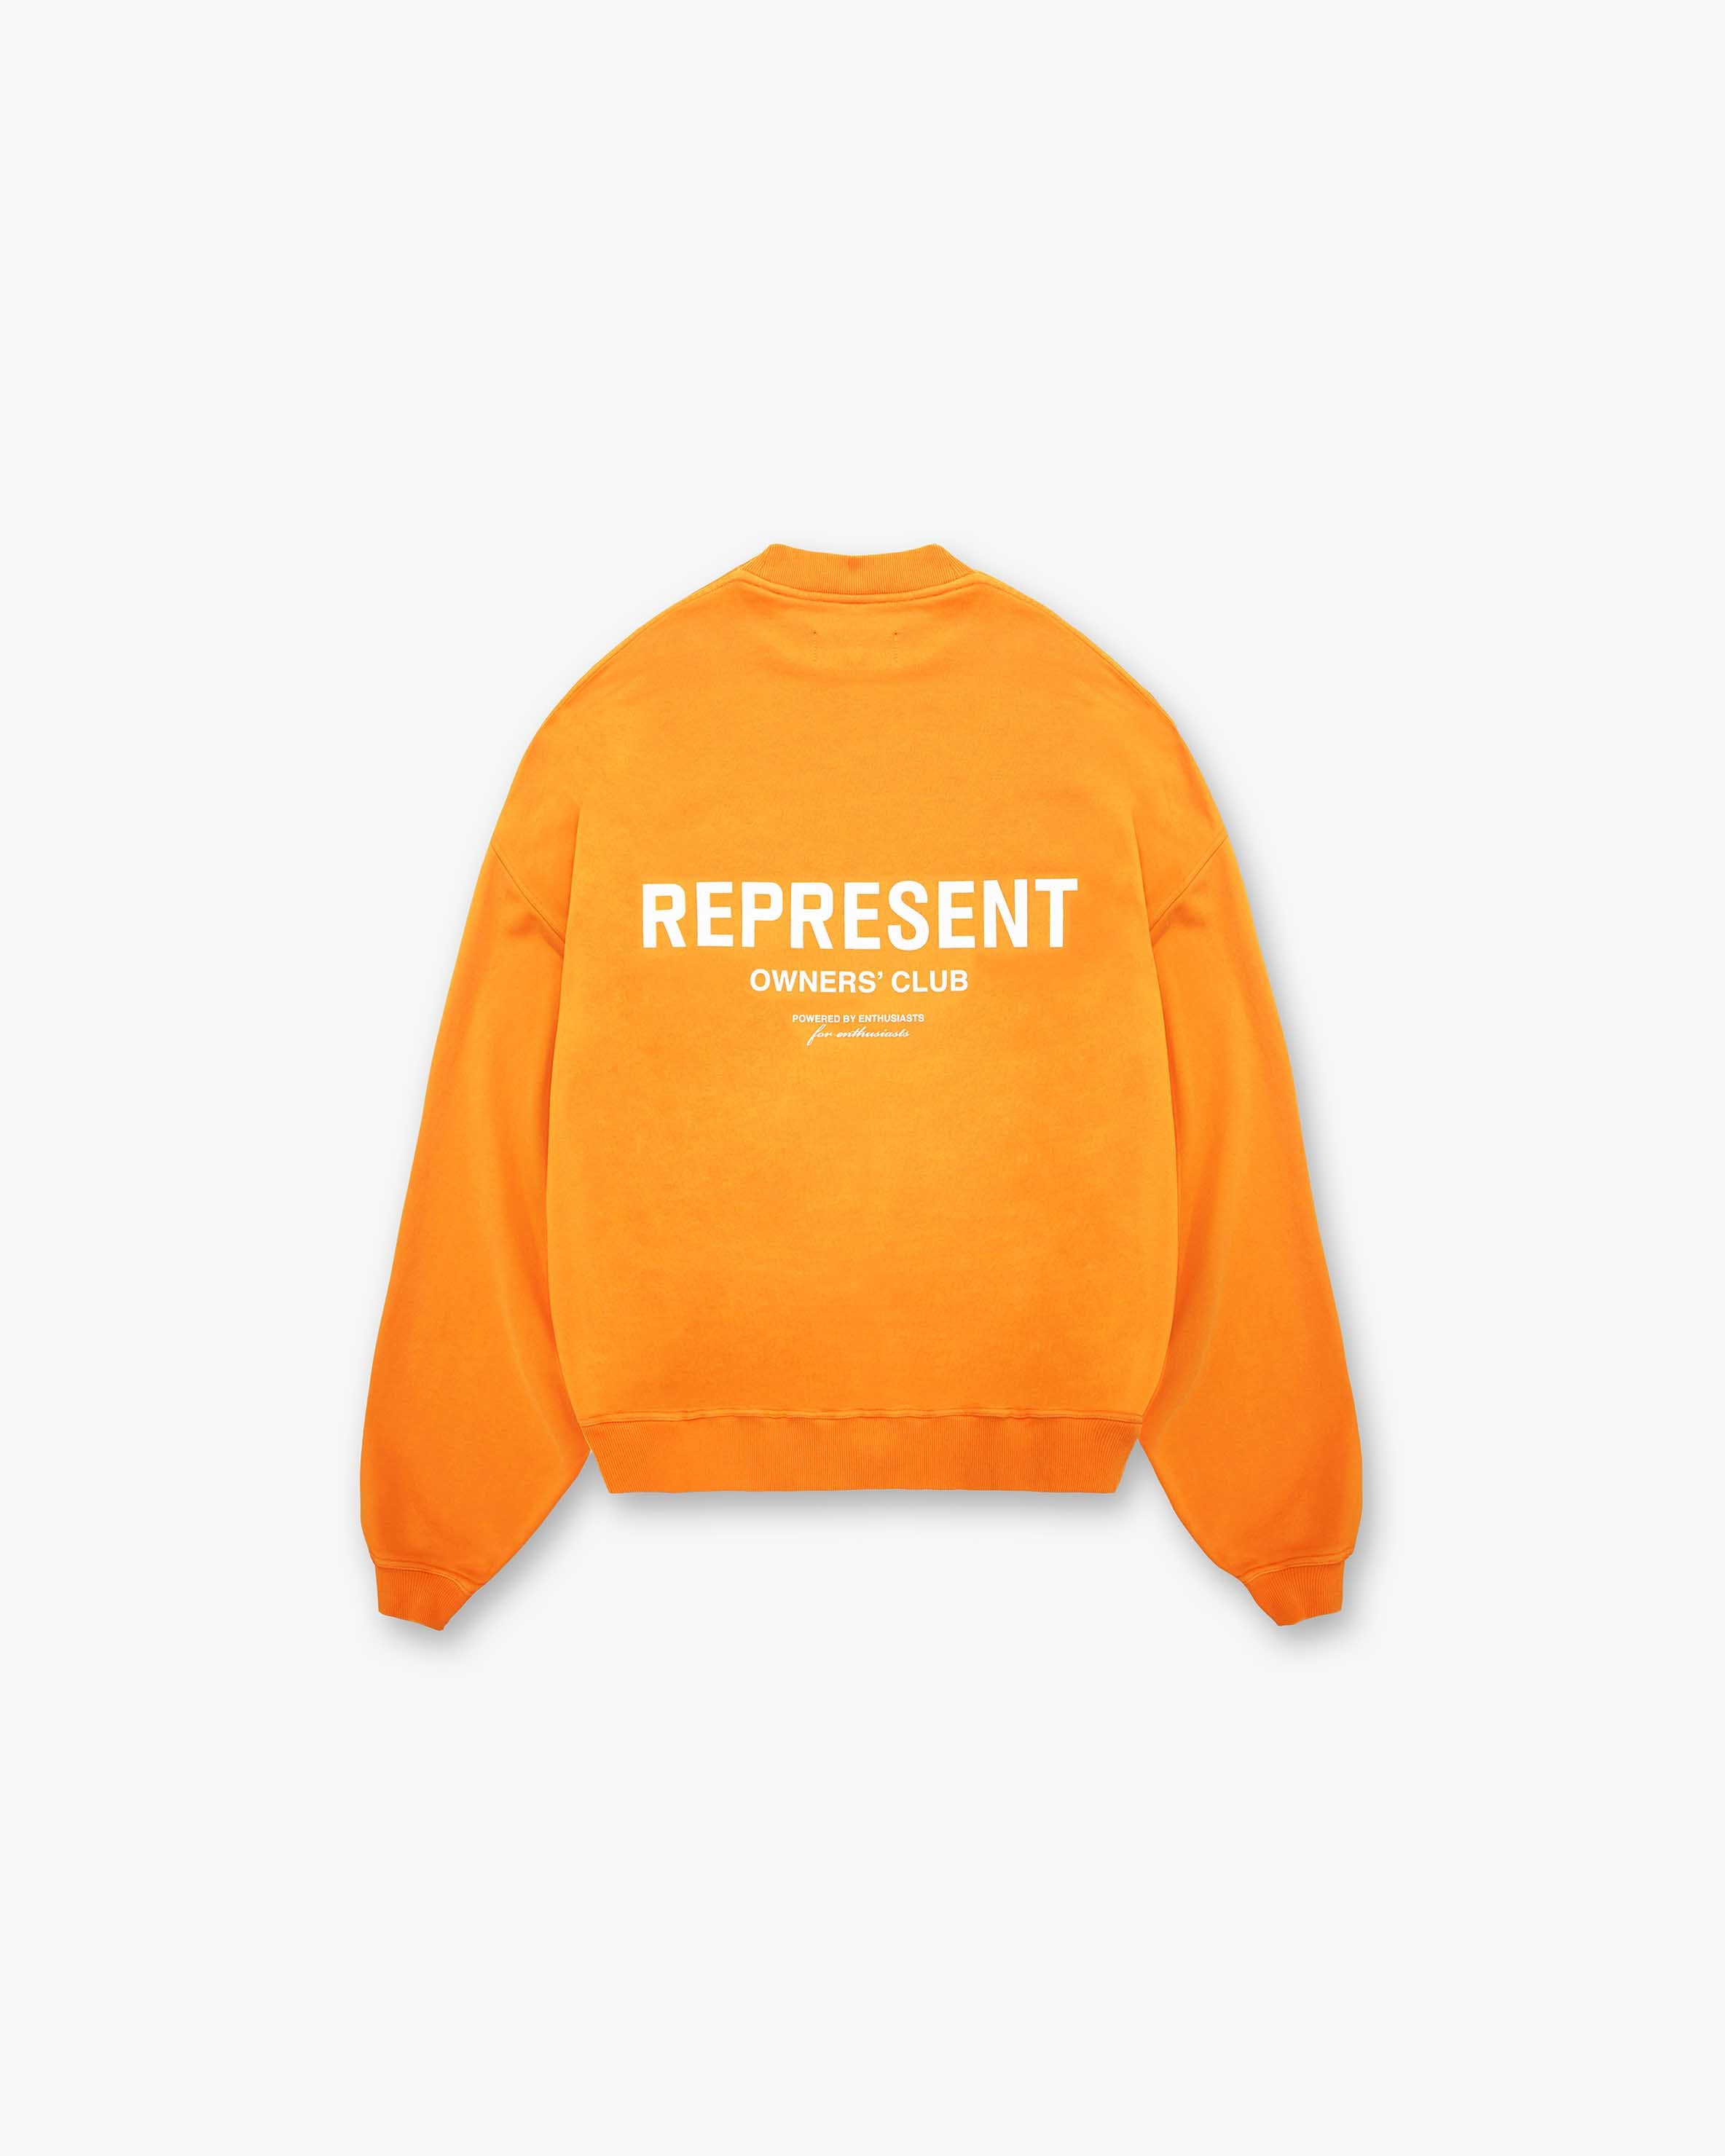 Represent Owners Club Sweater | Neon Sweaters Owners Club | Represent Clo